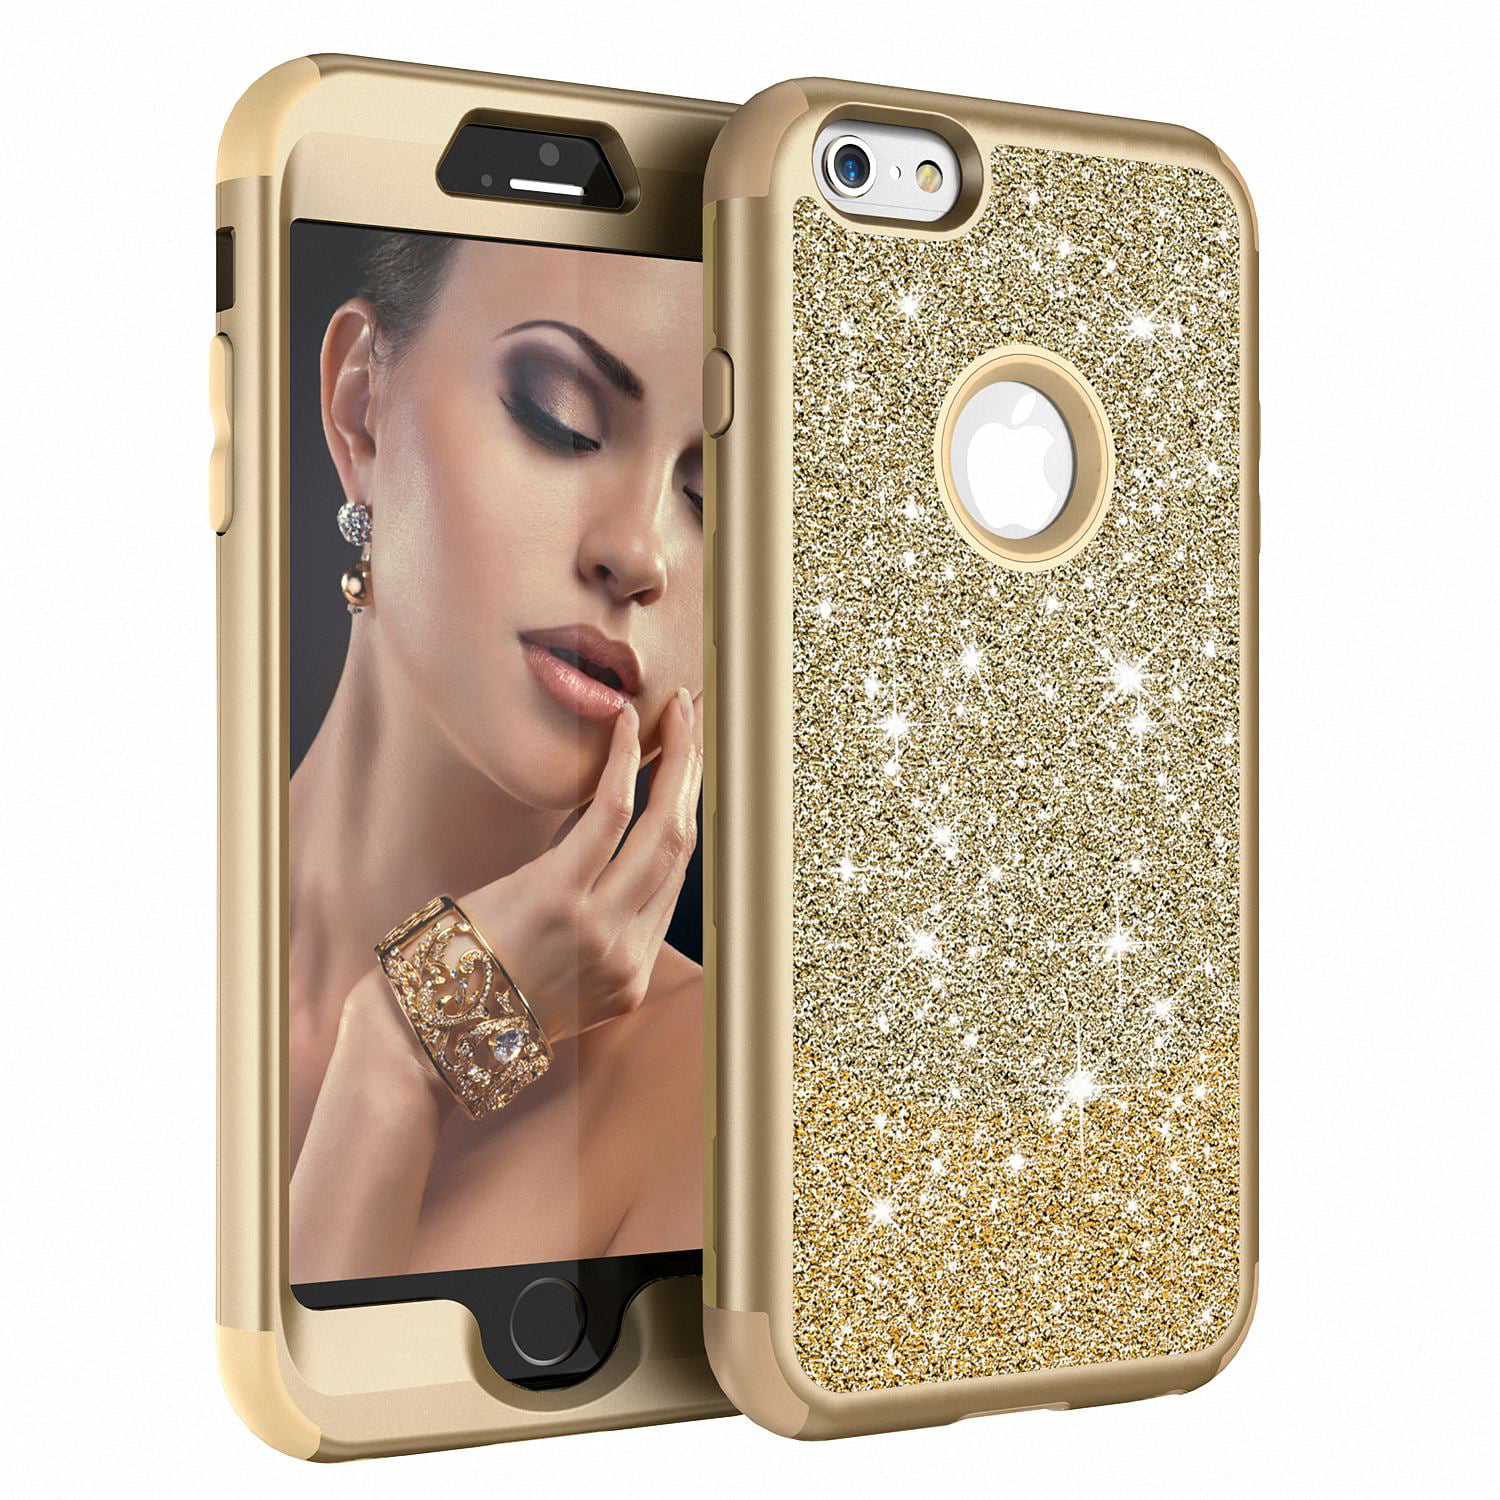 iPhone 6S / 6 Plus Case Cover, Allytech 3 In 1 Silicone PC Glitter